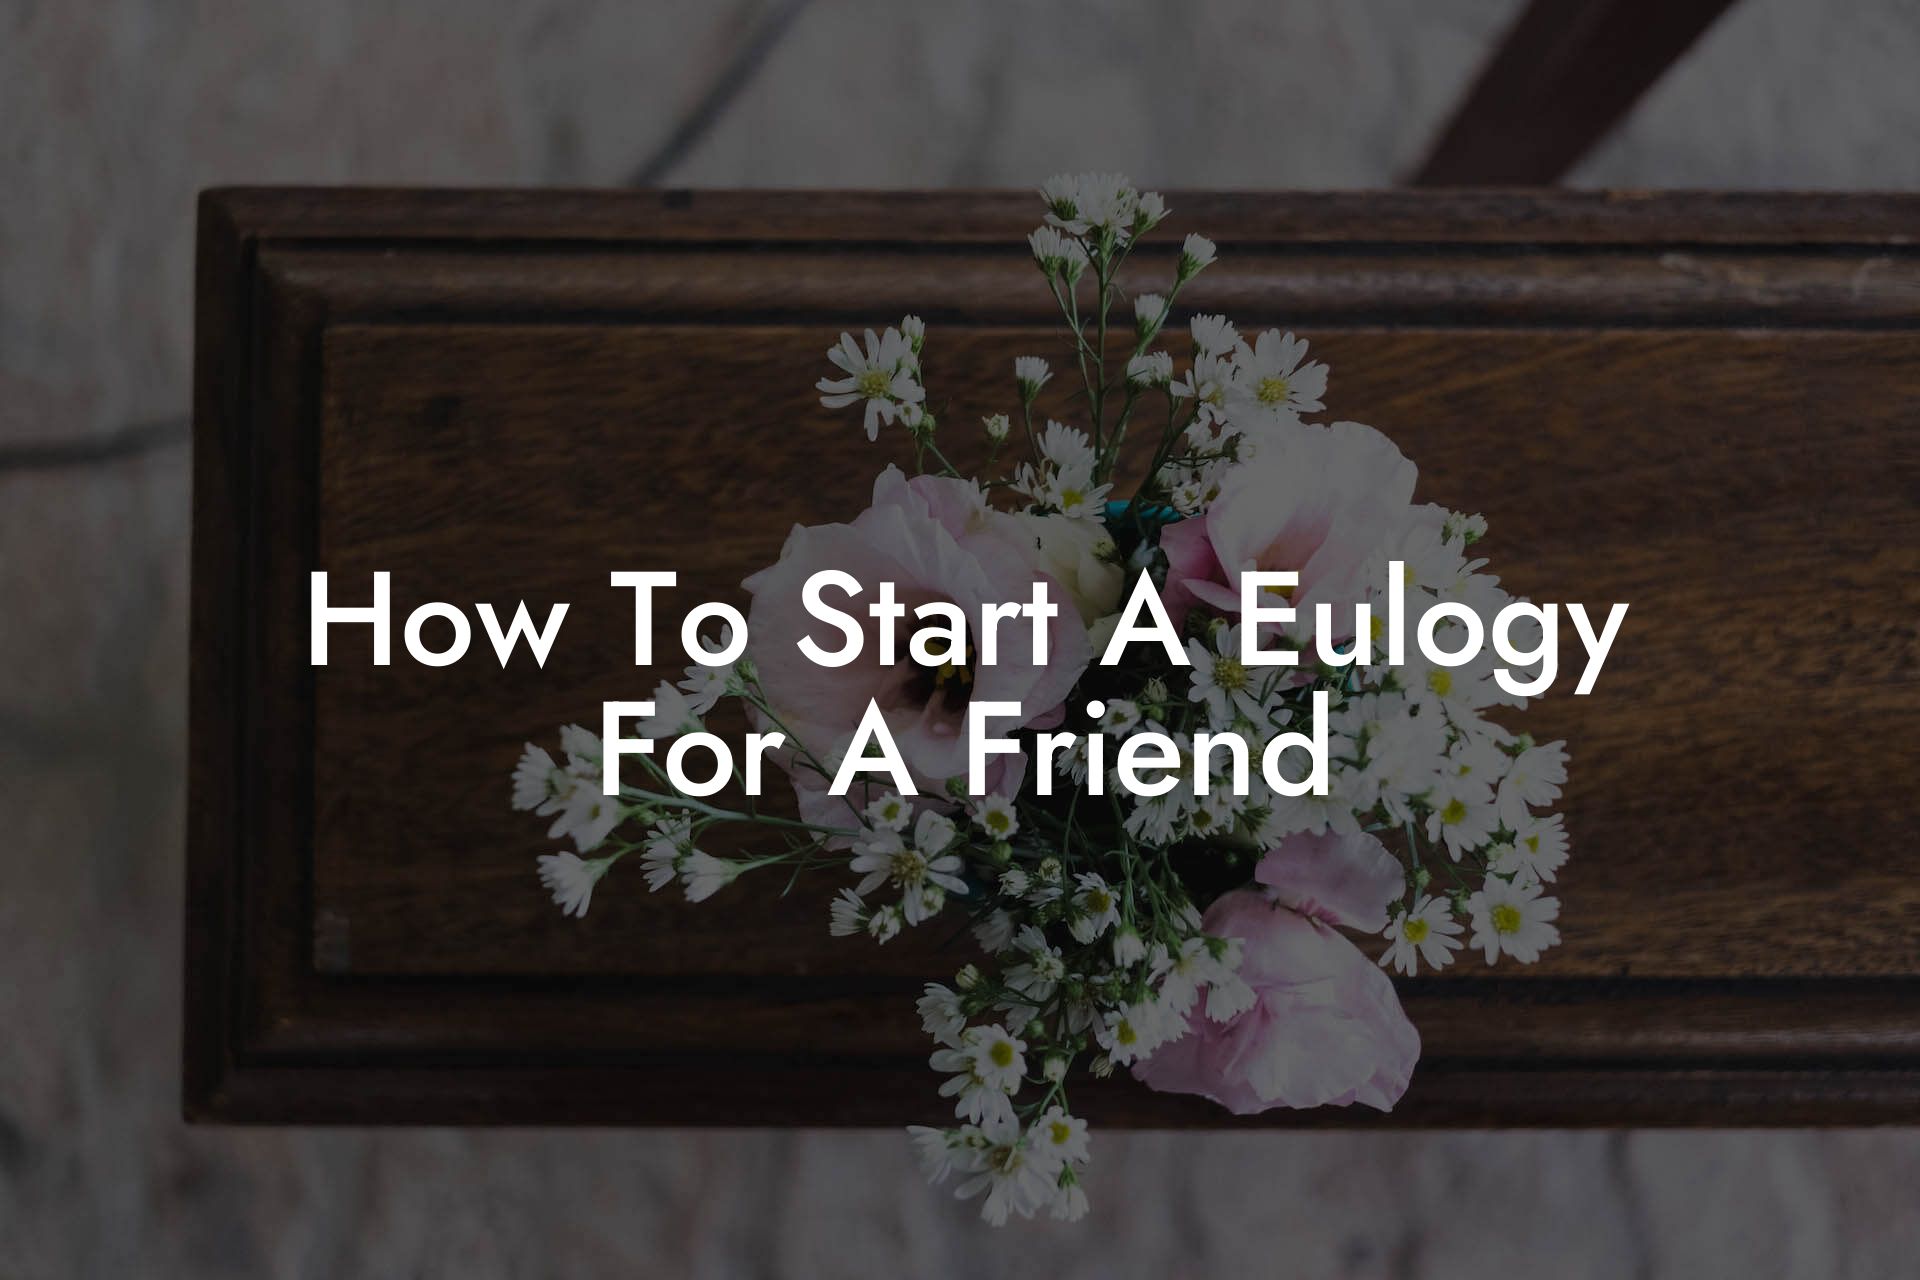 How To Start A Eulogy For A Friend?